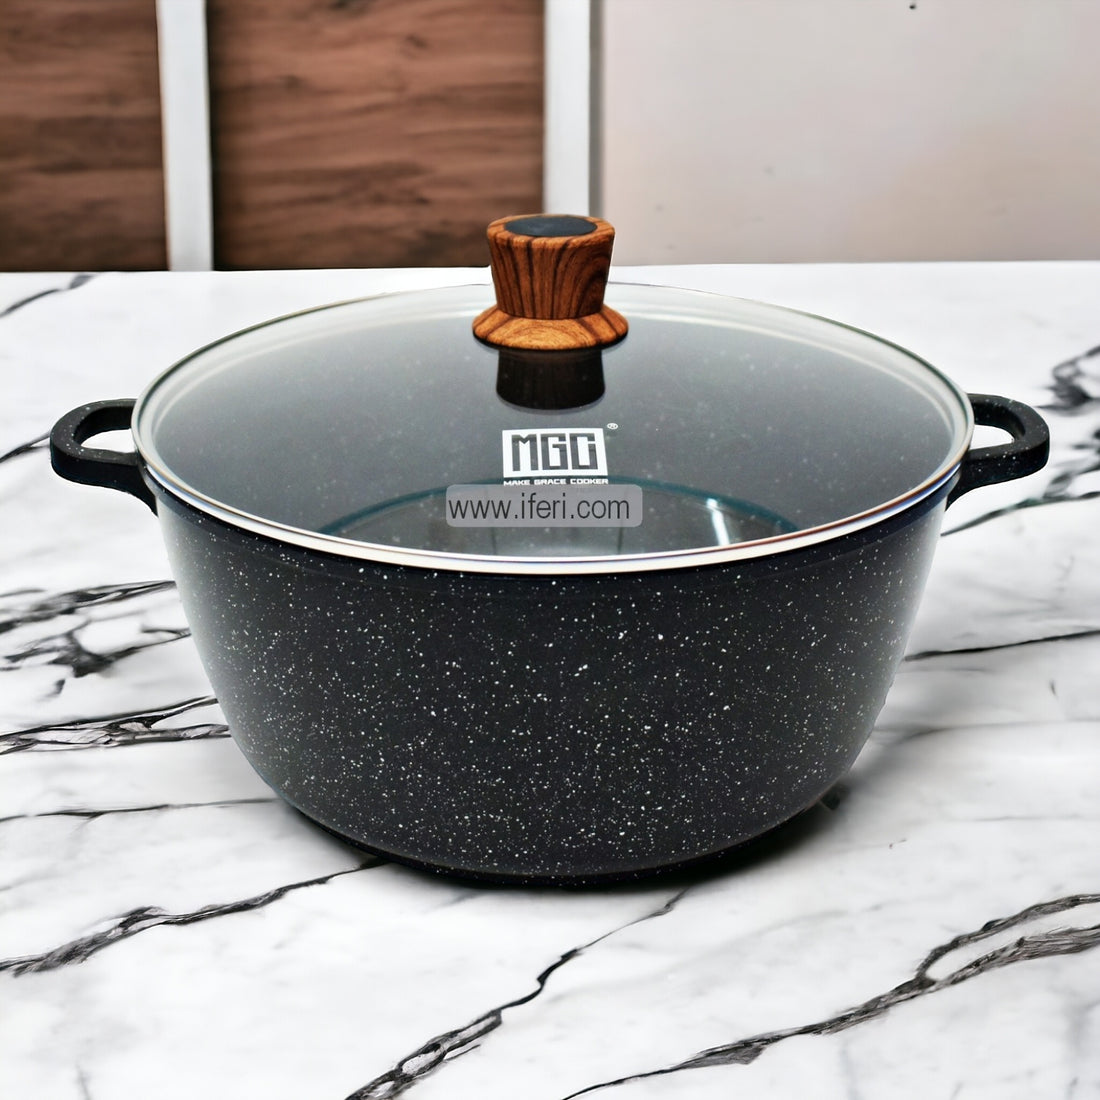 Buy MGC Non-Stick Cookware / Casserole with Lid online from iferi.com in Bangladesh